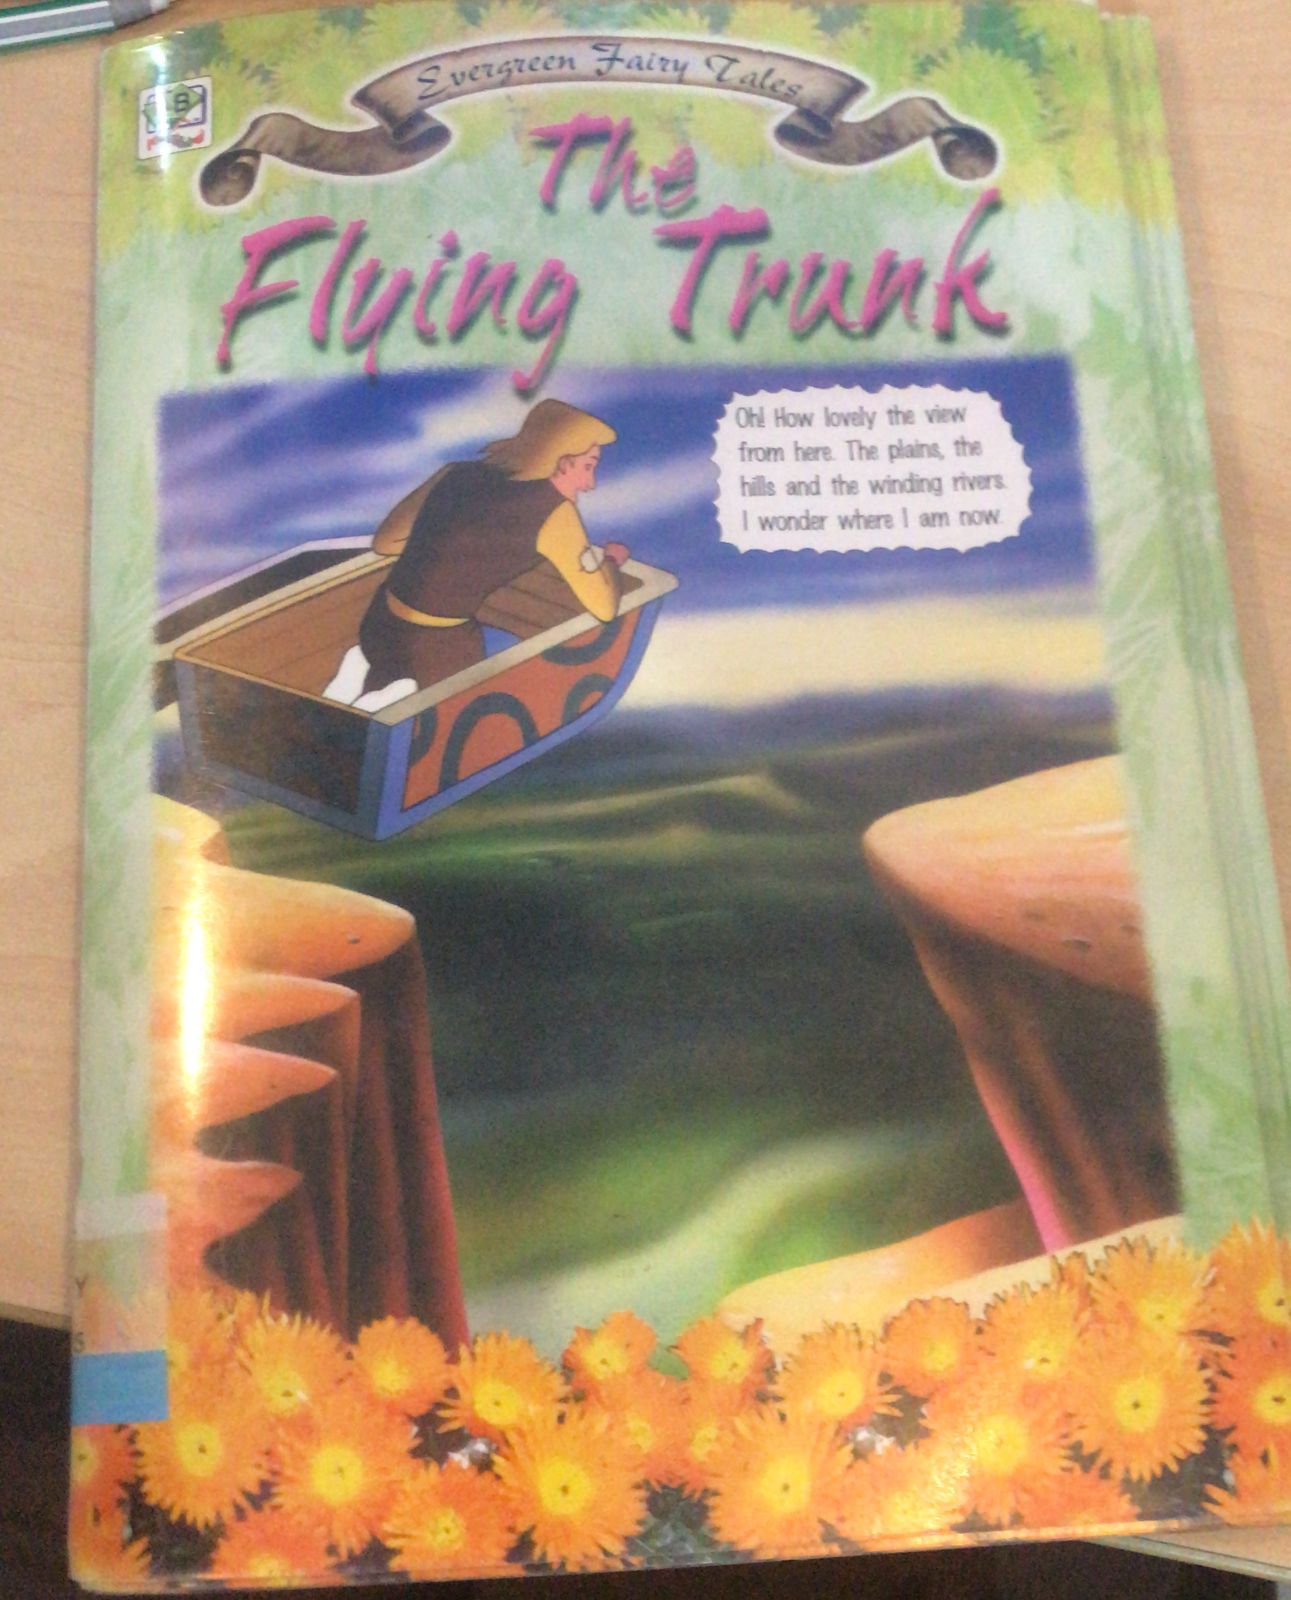 The flying trunk